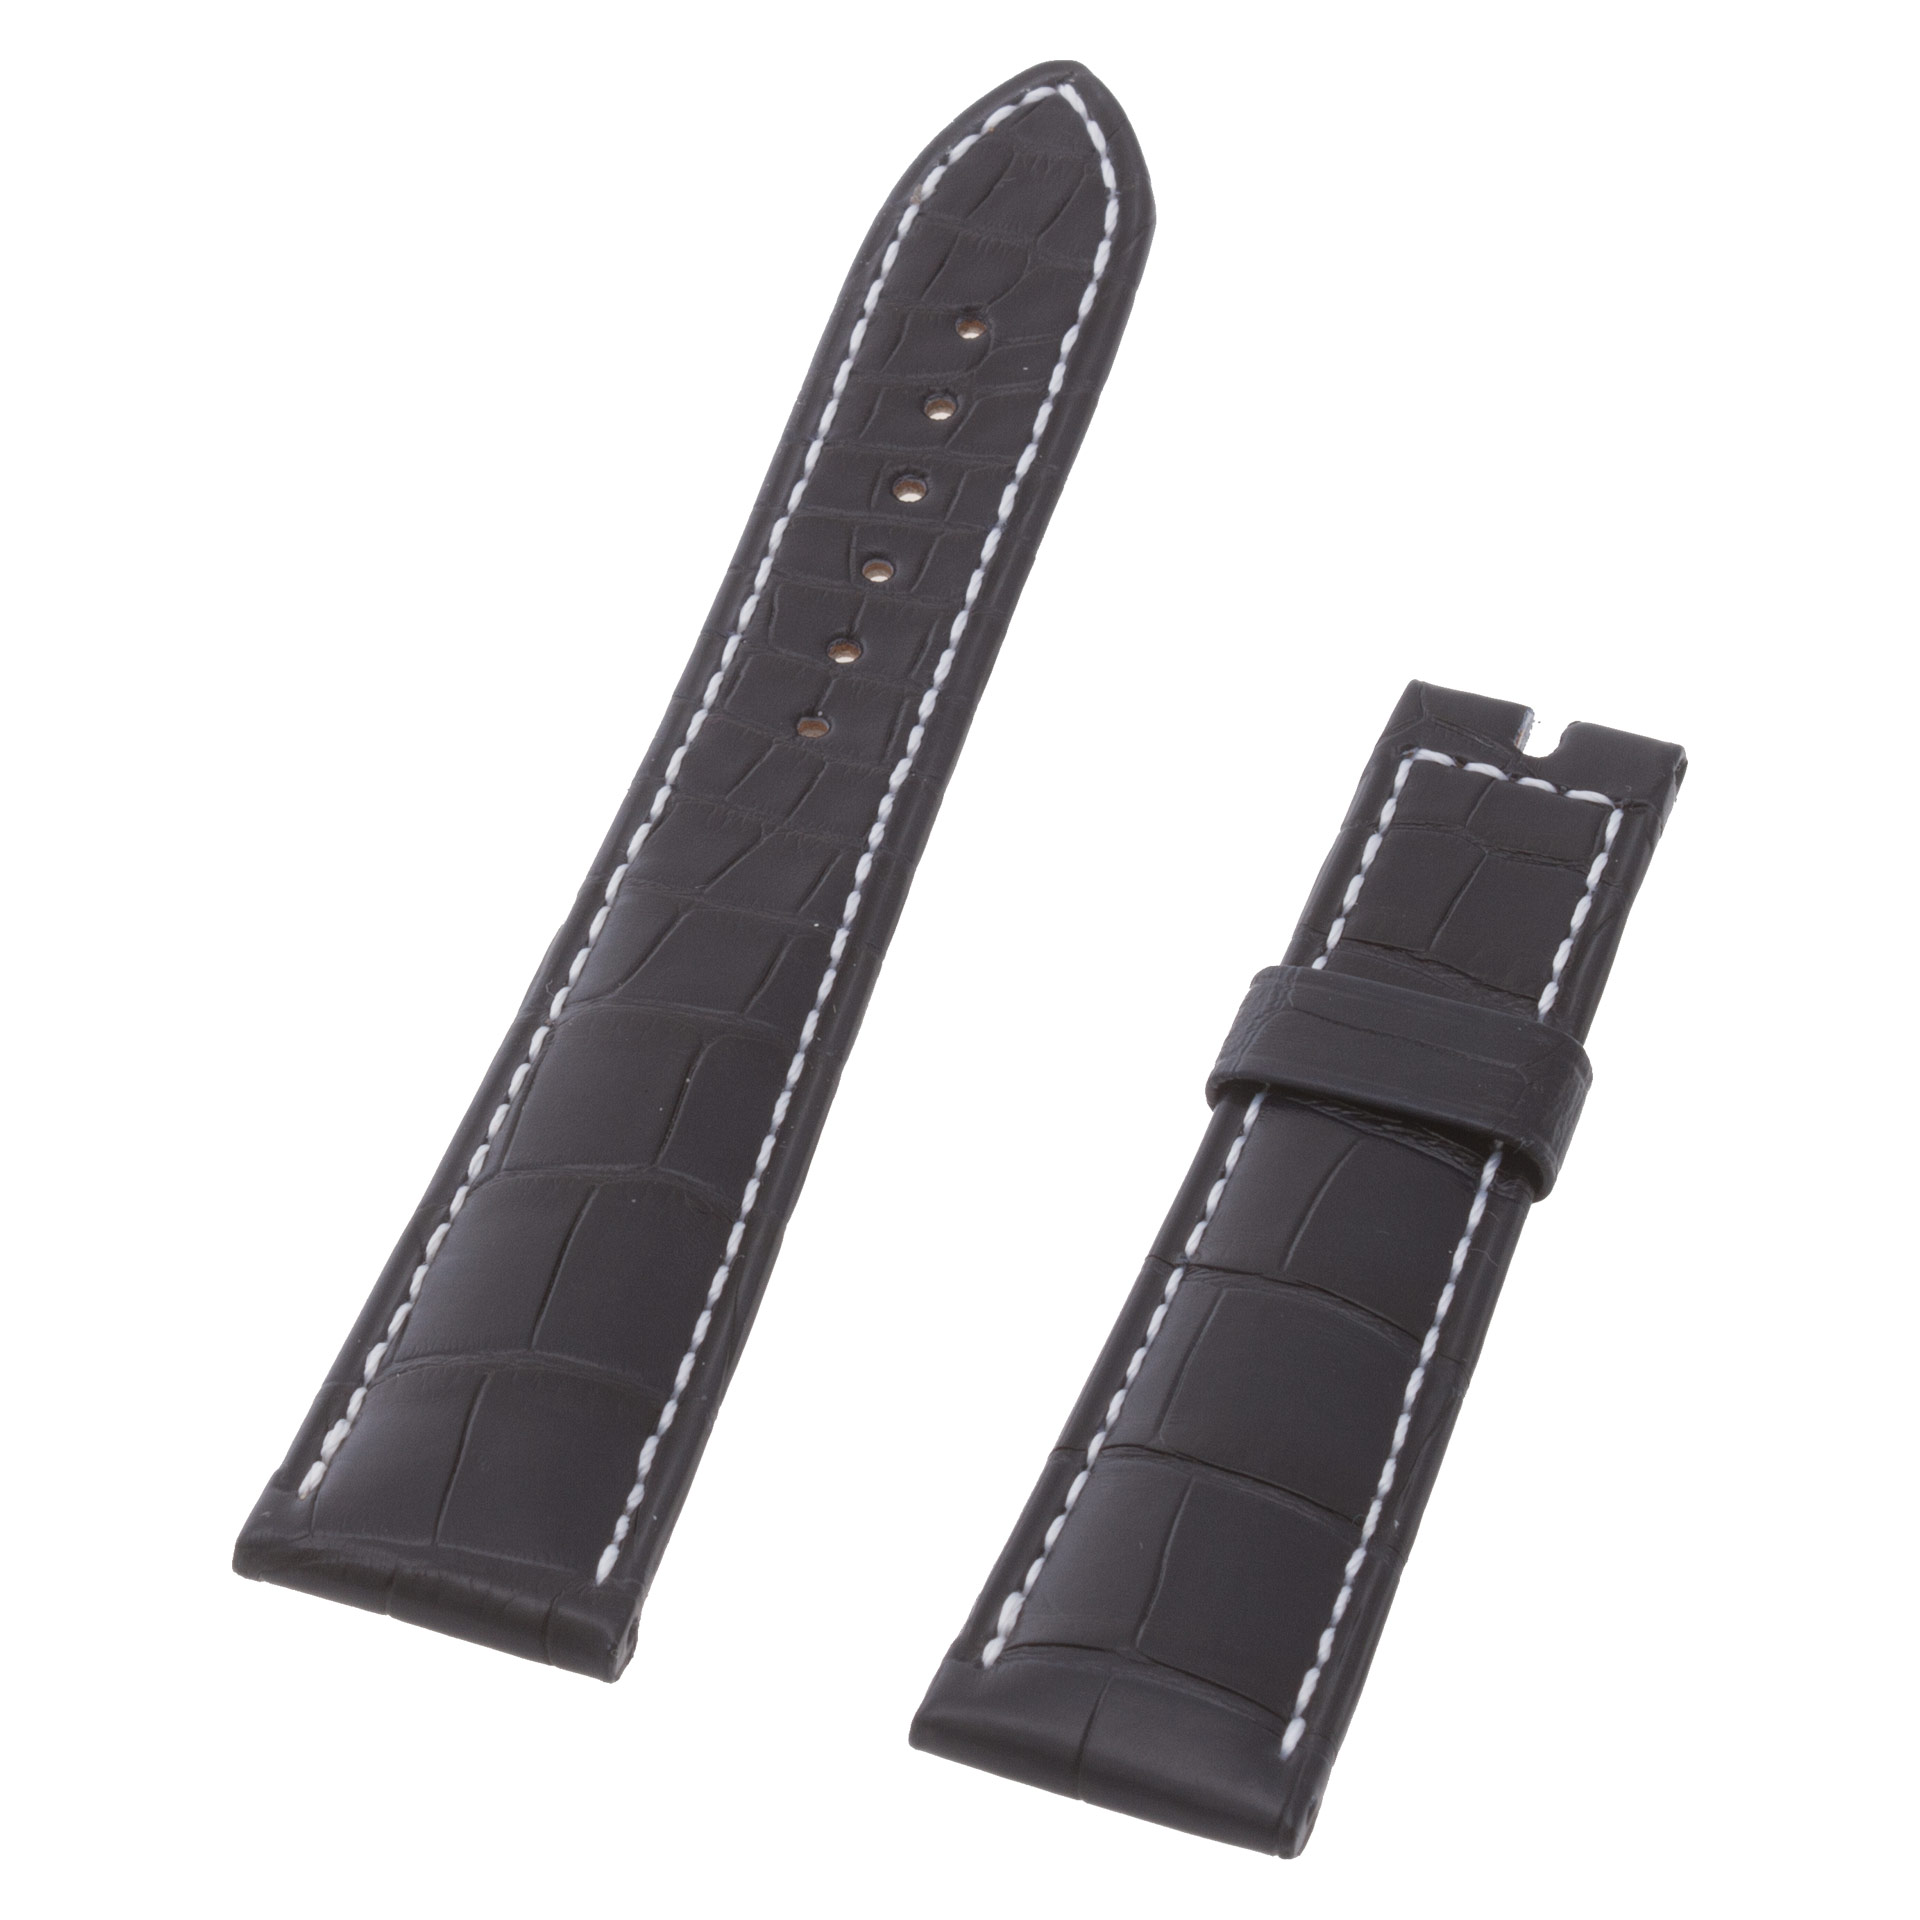 Breguet crocodile strap dark blue with white stitching (21x16mm). Length of 4 1/2" long piece and 3"